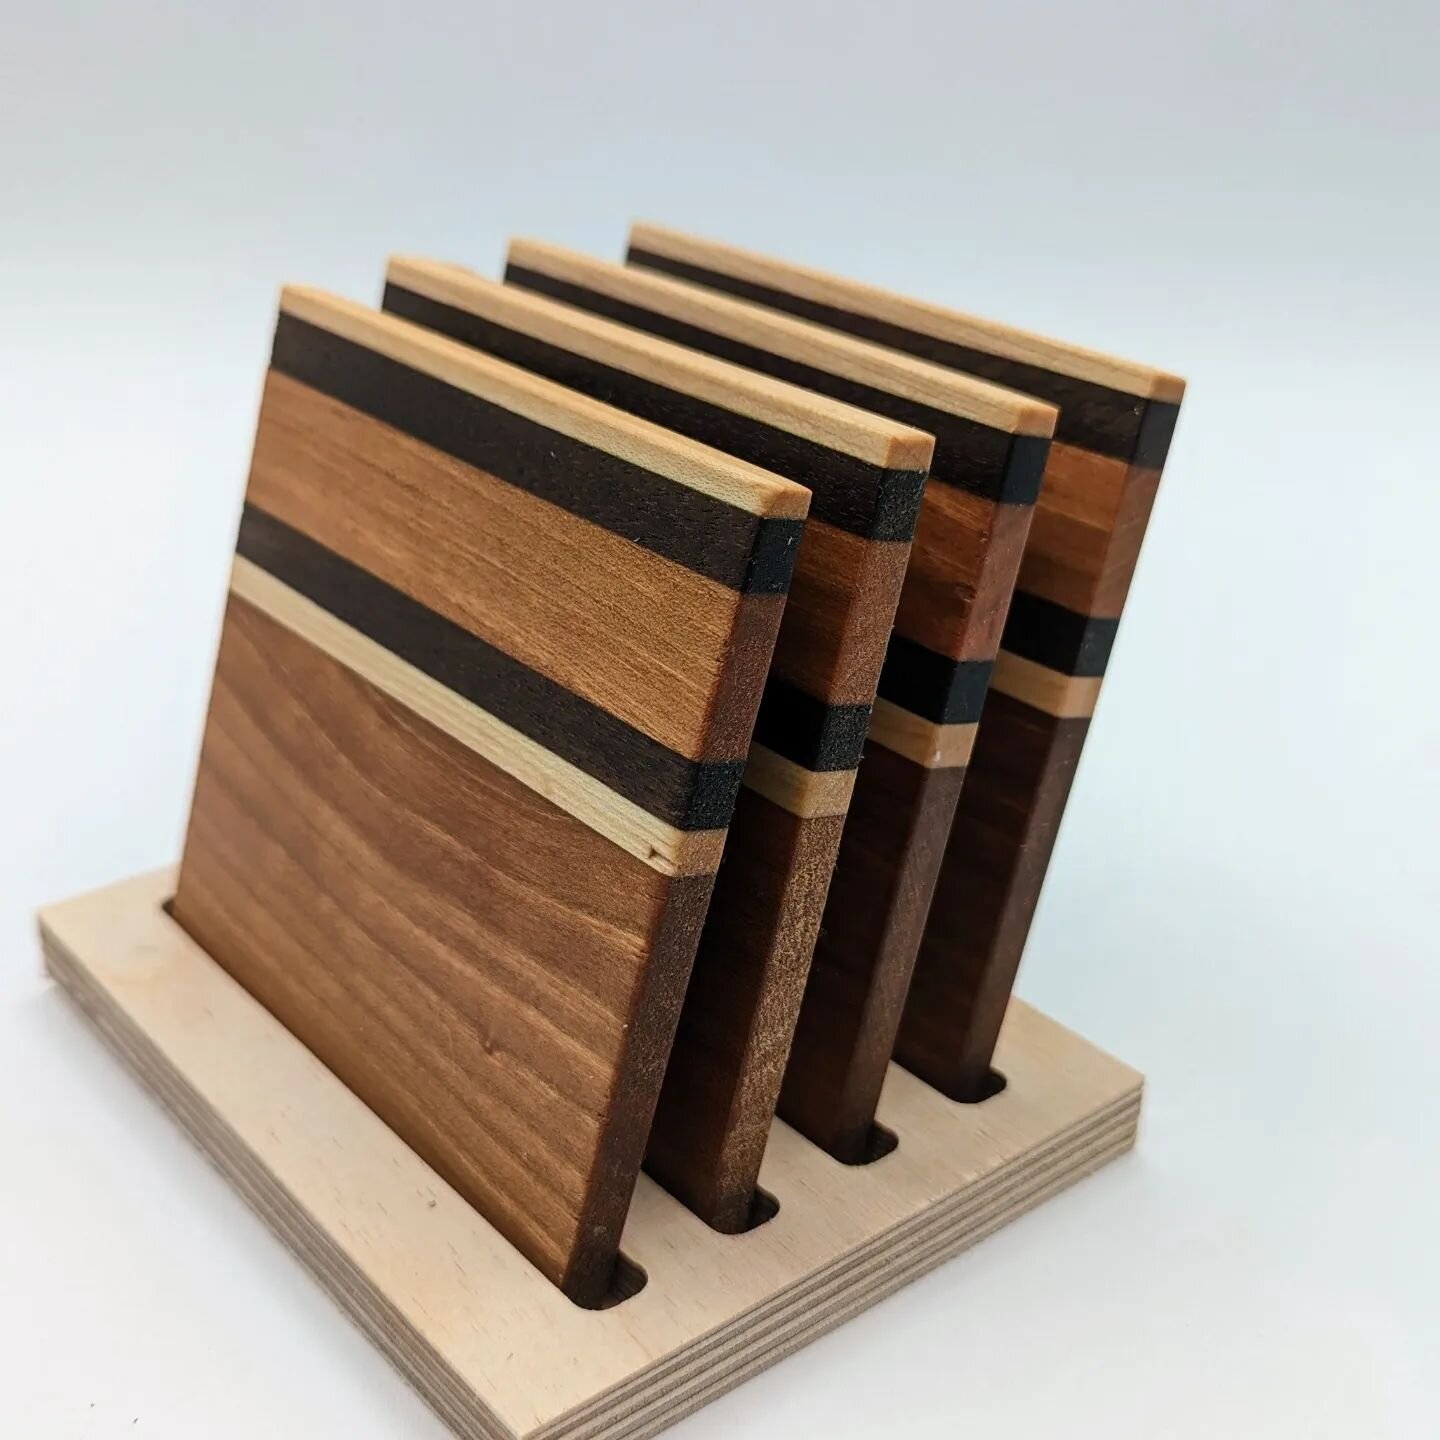 For those who like to drink... and protect their furniture!

Solid wood 4&quot; coasters. Exotic and domestic woods.  Made entirely out of scraps lying around the shop. Never know what we'll make next. Get yours today. Each set of 4 or 6 comes with a